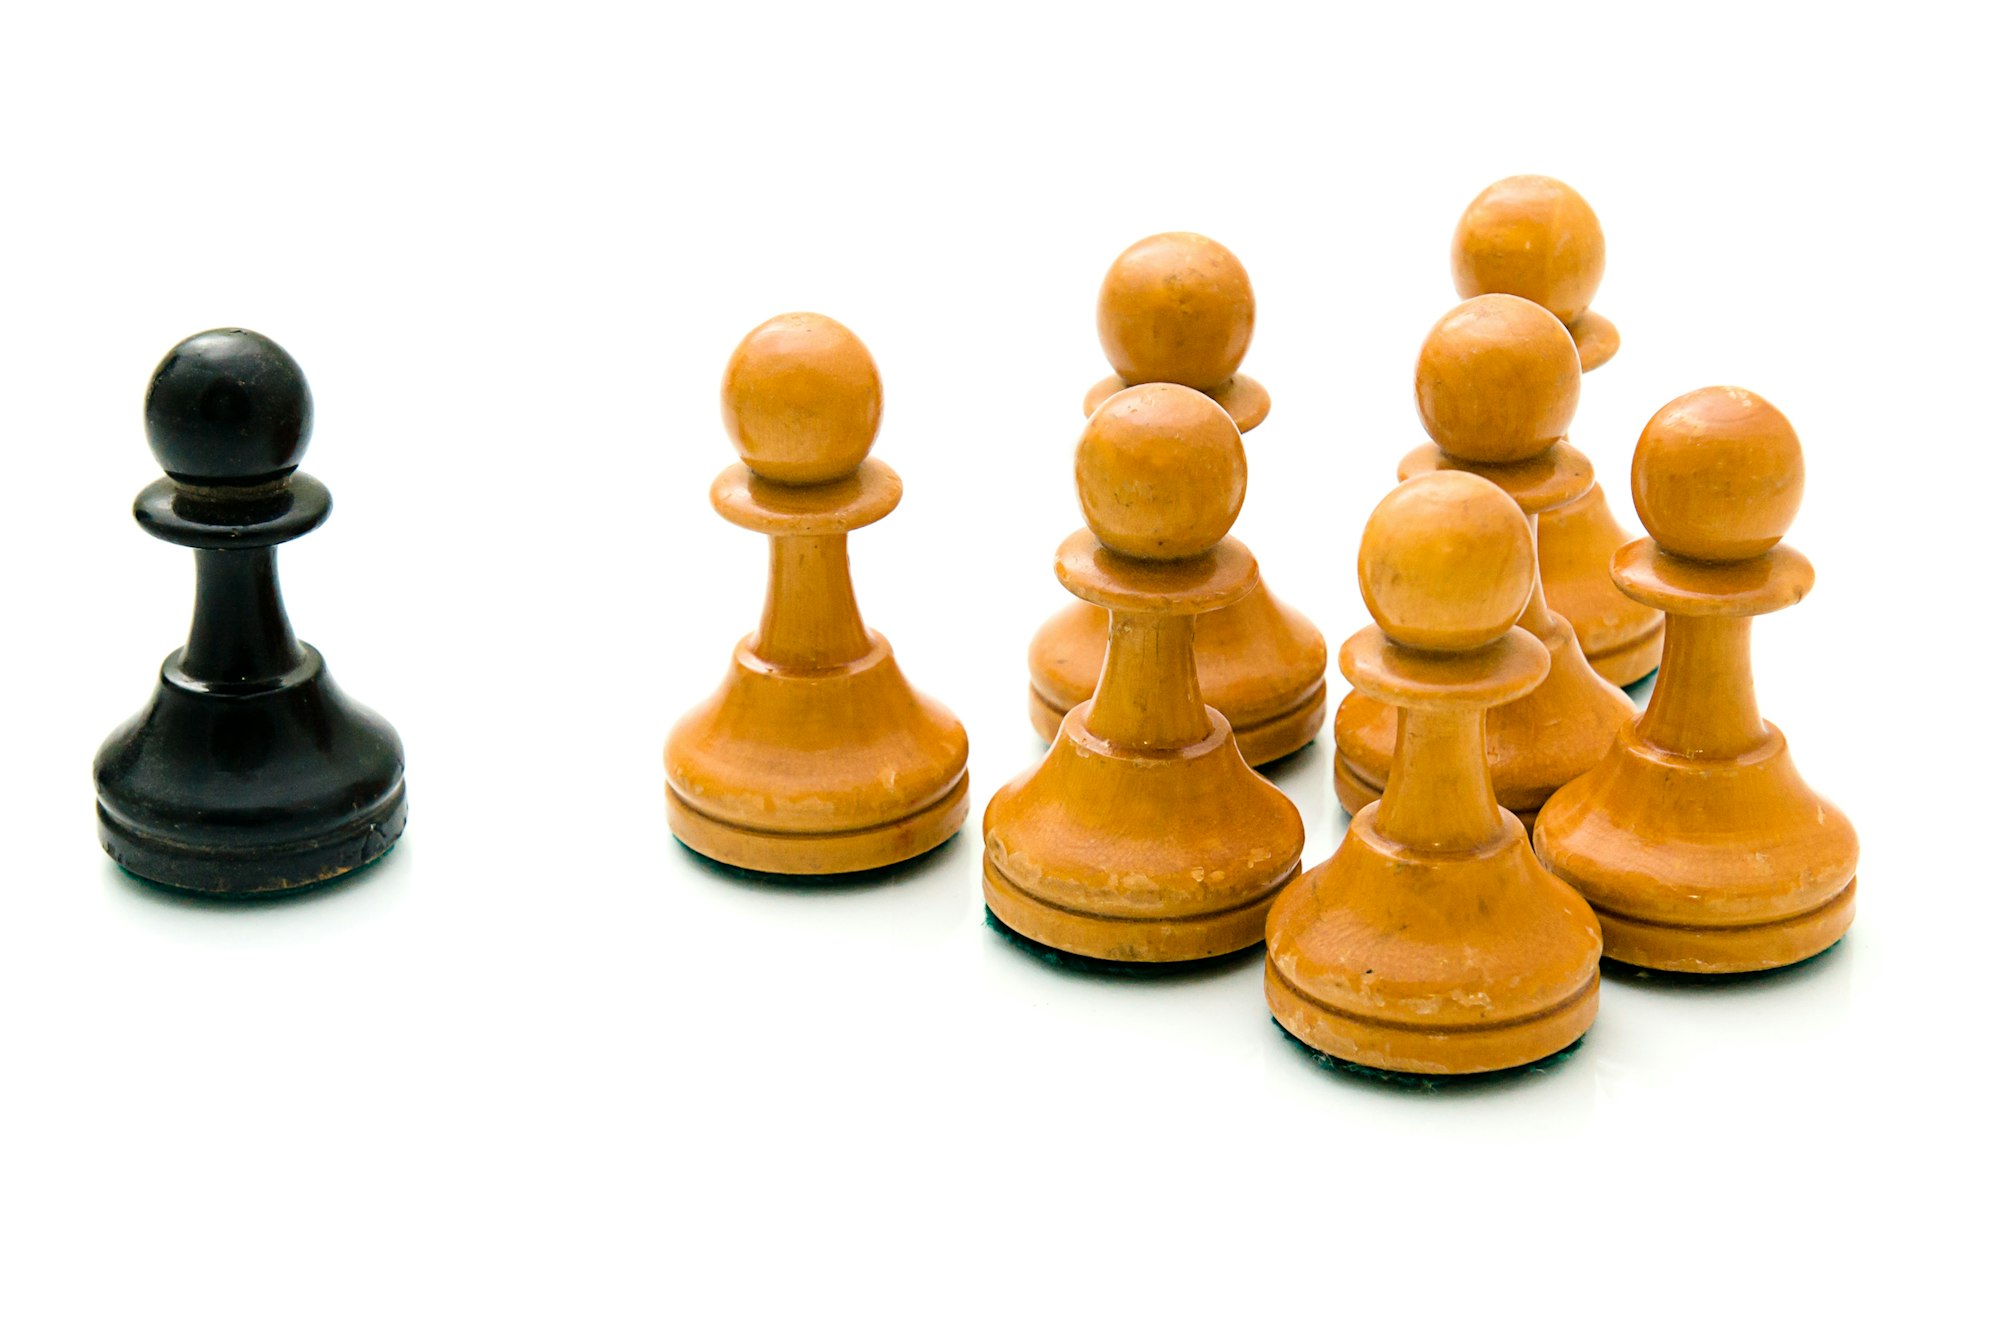 Closeup shot of a black pawn in front of a group of white pawns-strategy, teamwork concept